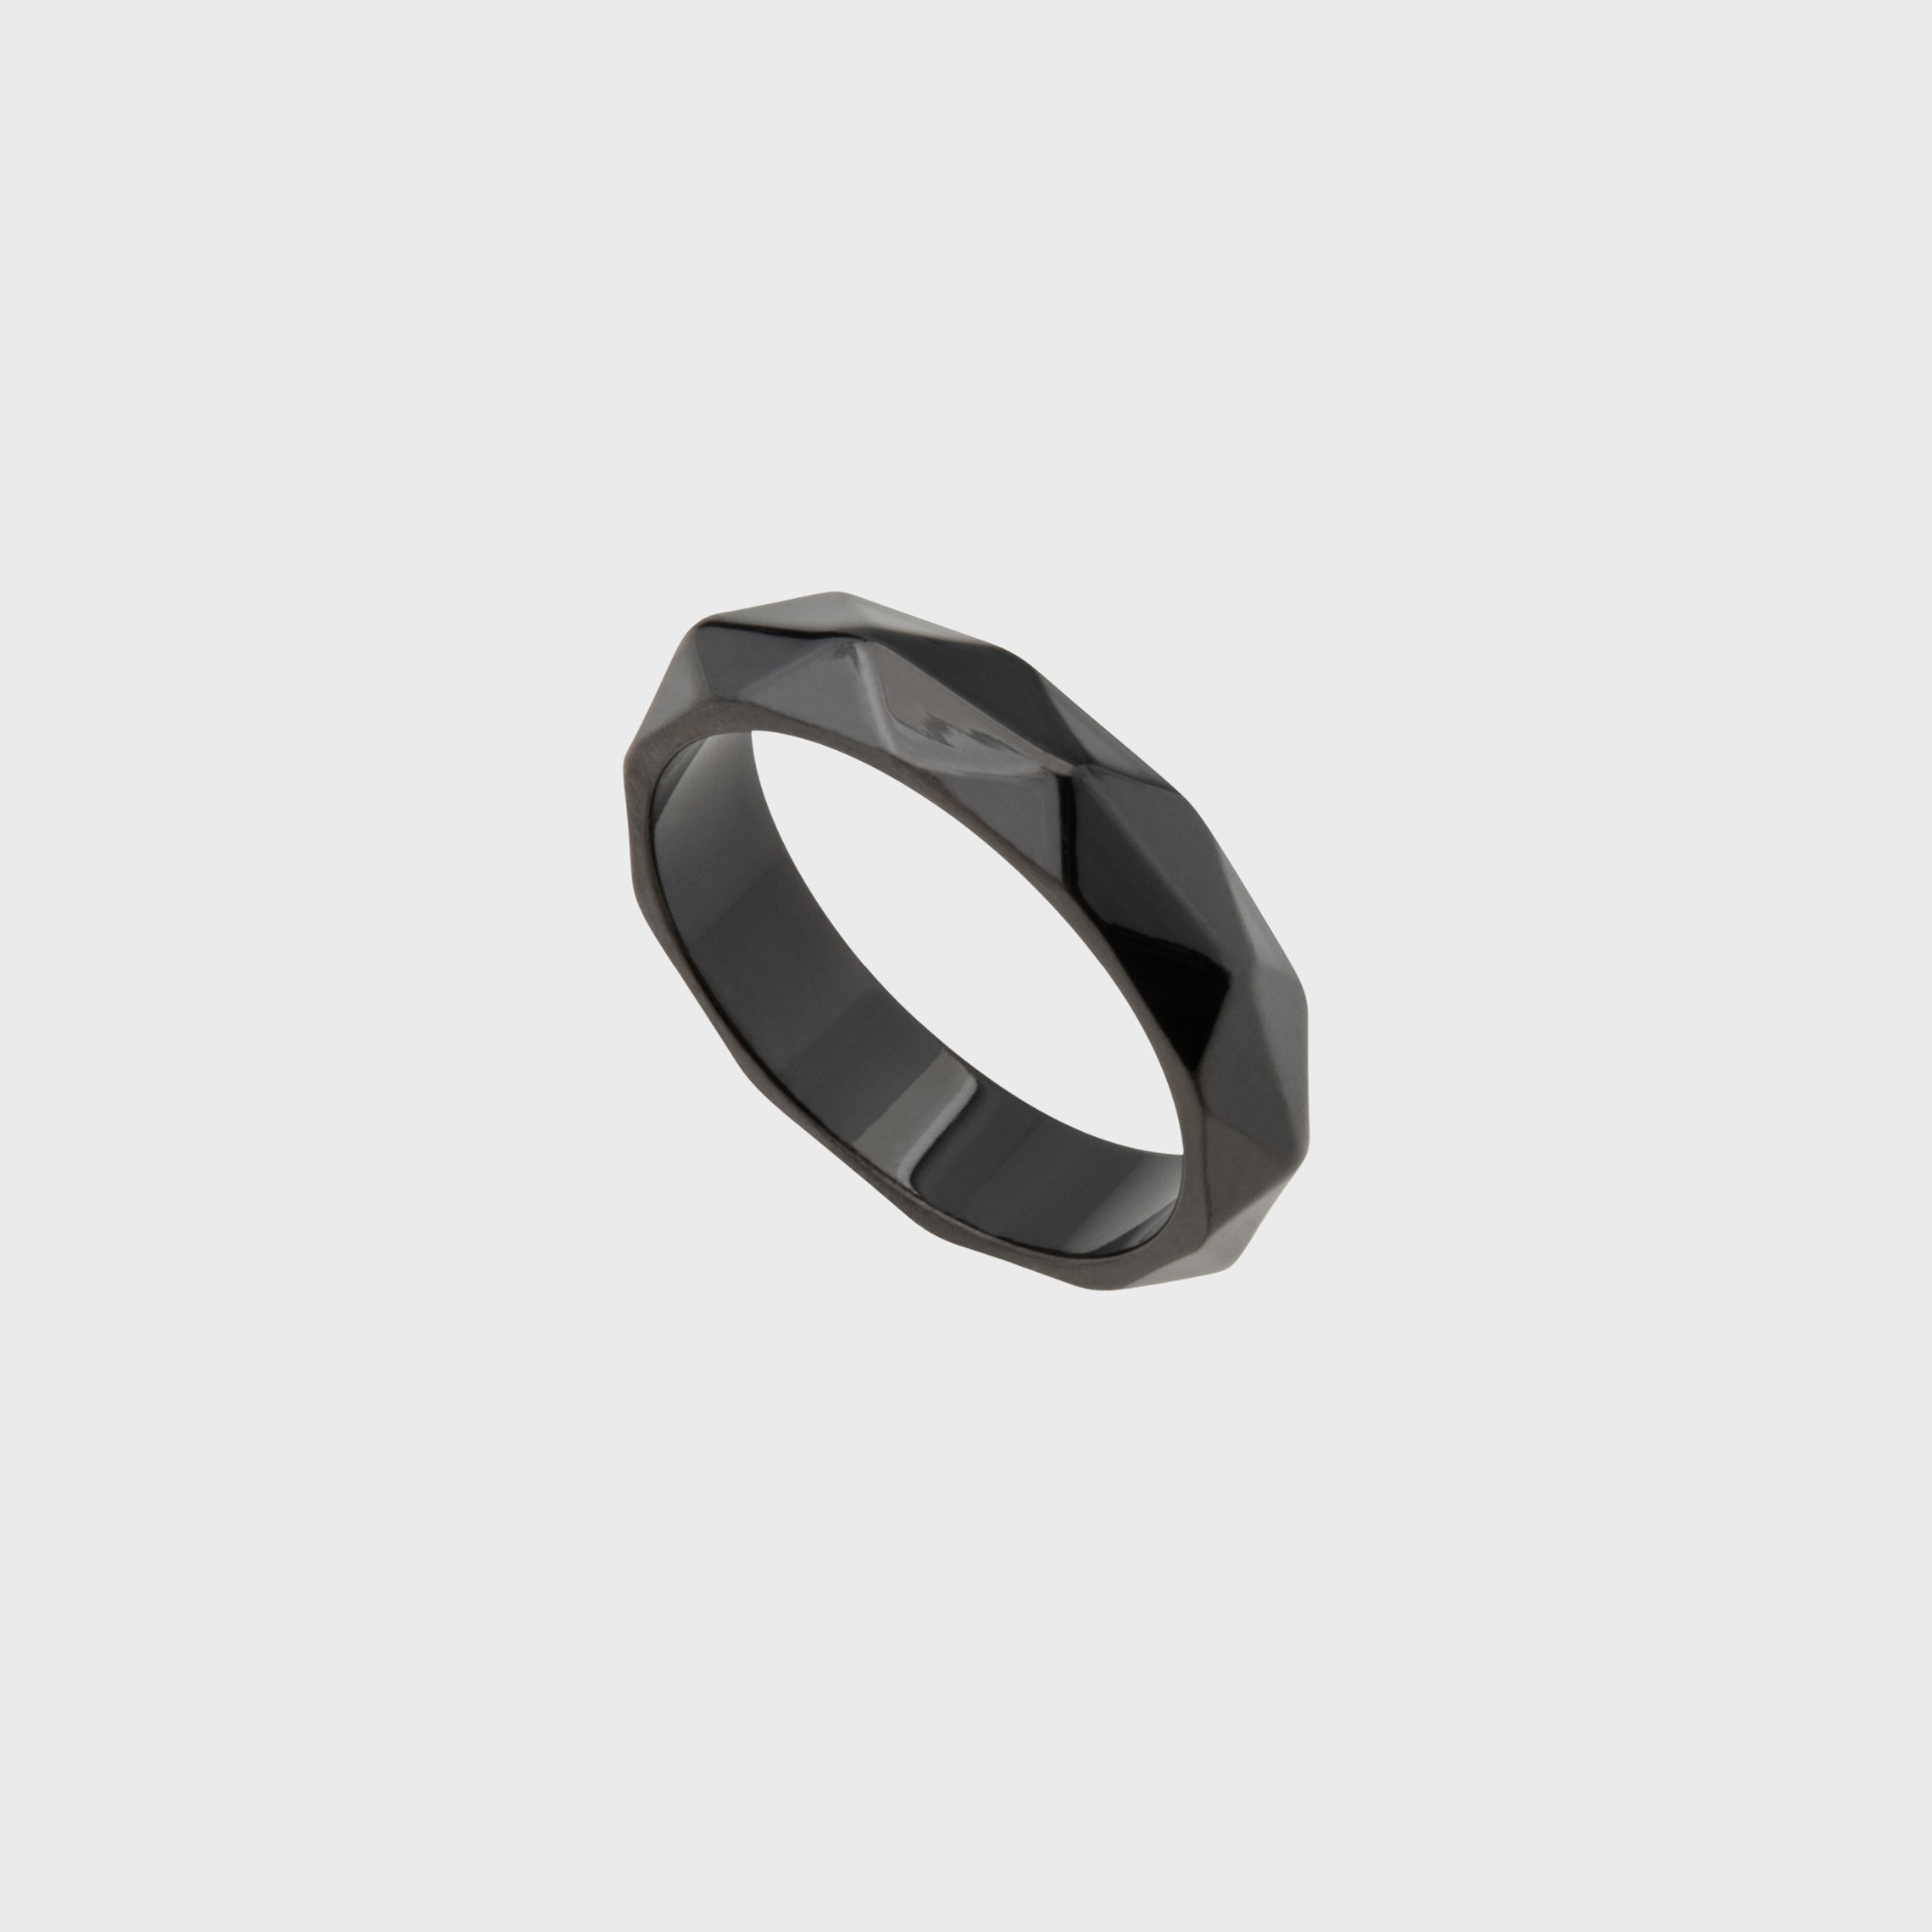 Stainless Steel Geometric Shaped Ring in Black 